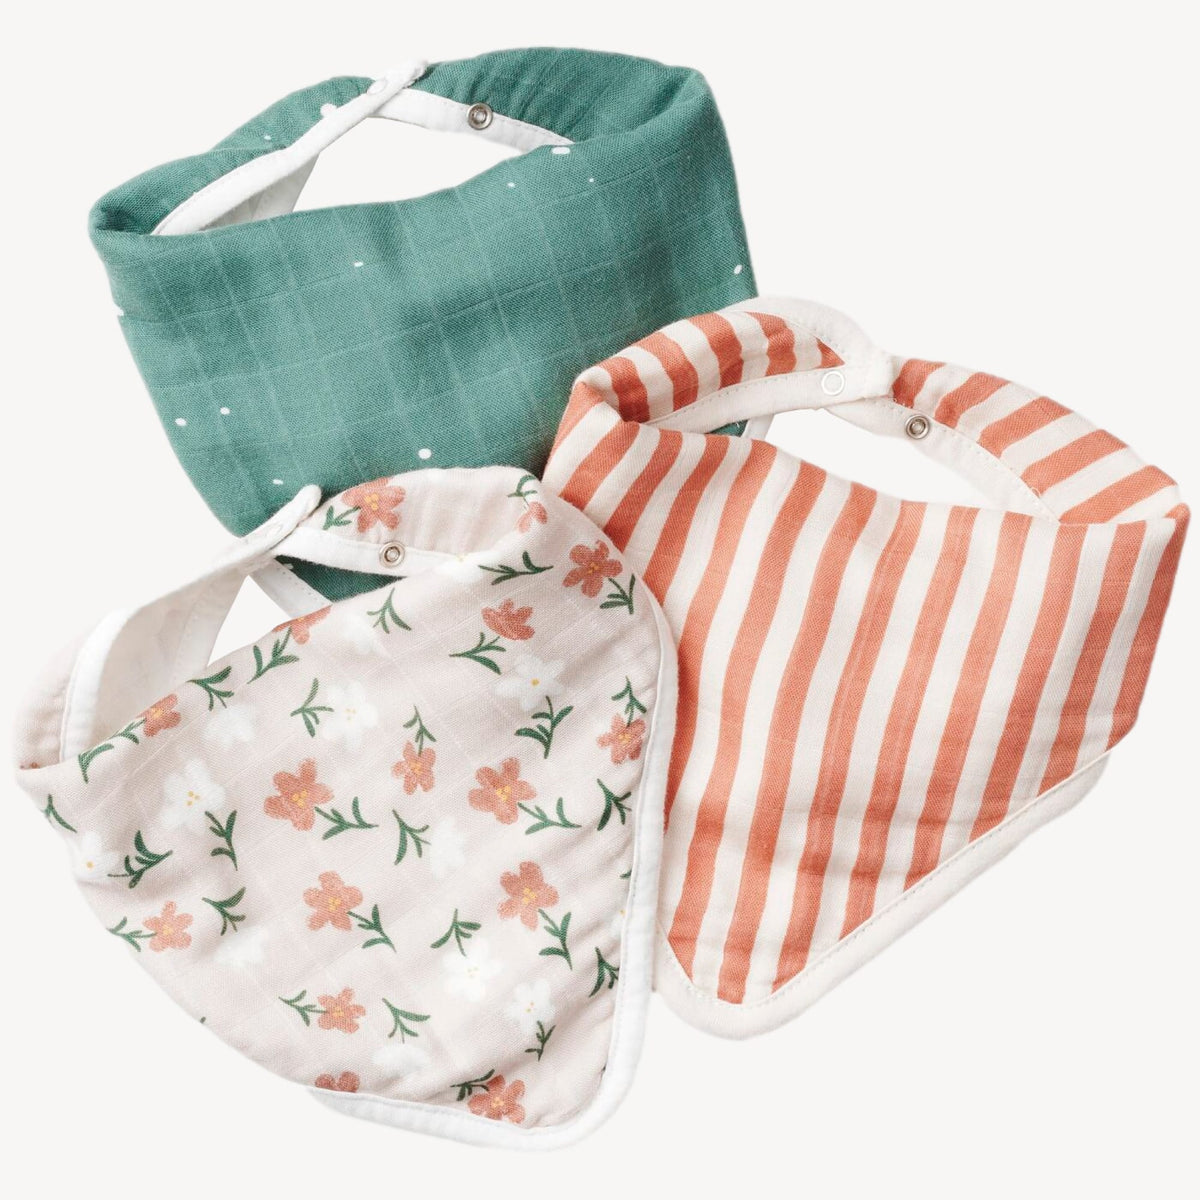 Bandana Bibs - Pack of 3 - Starry/Floral/Stripes - Canada Stock